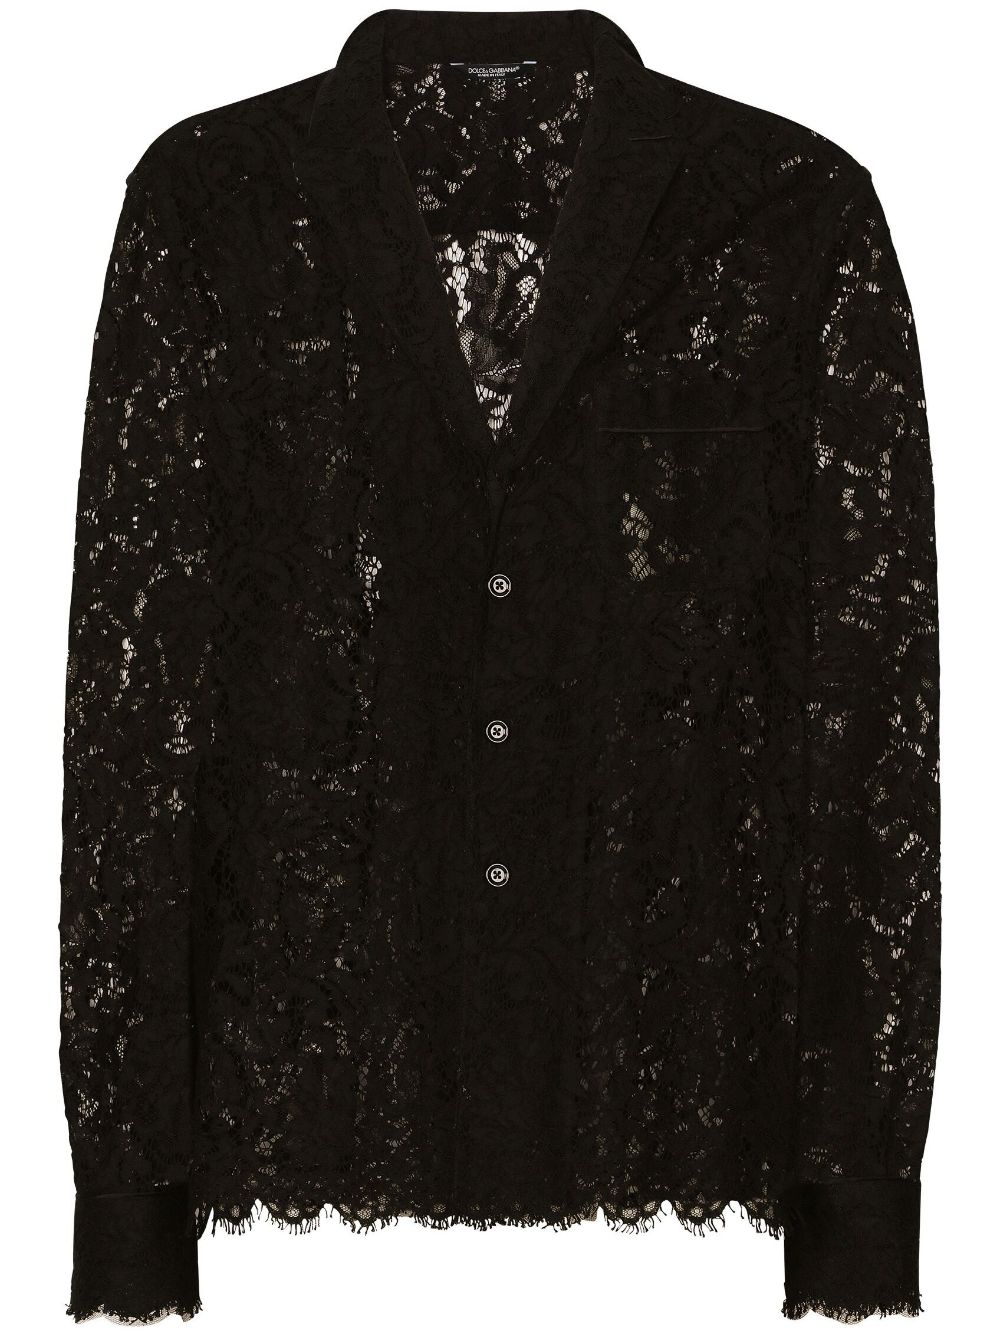 Image 1 of Dolce & Gabbana lace-panelling notched-collar shirt